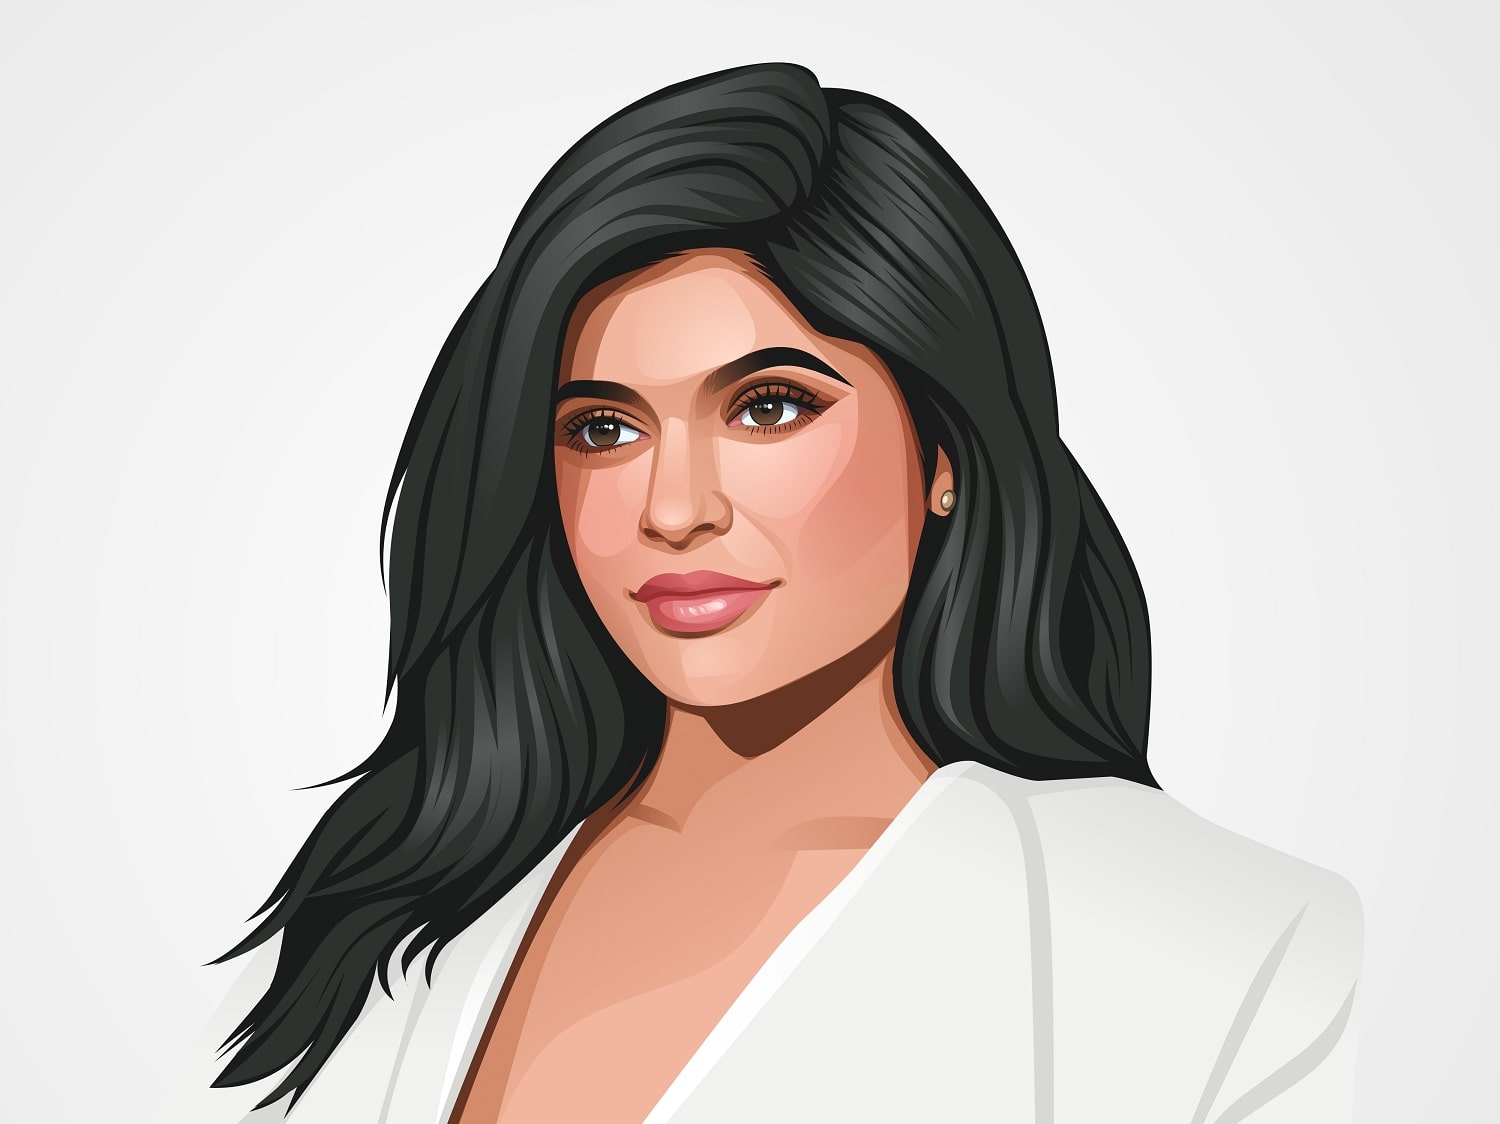 kylie jenner Copyright by Inspirationfeed.